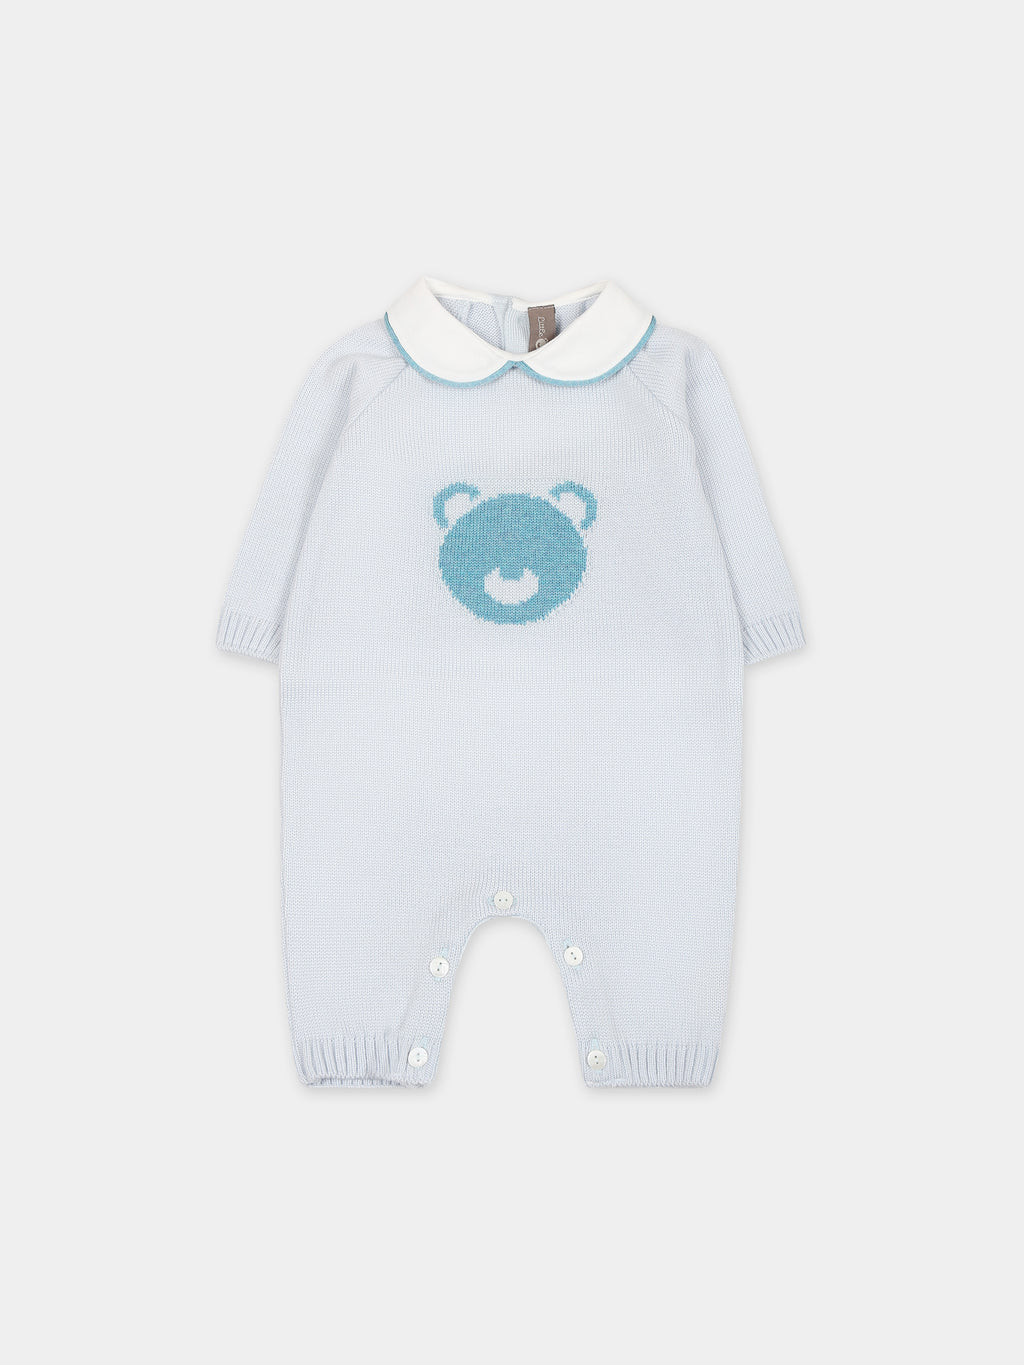 Light blue babygrown for baby boy with embroidered bear